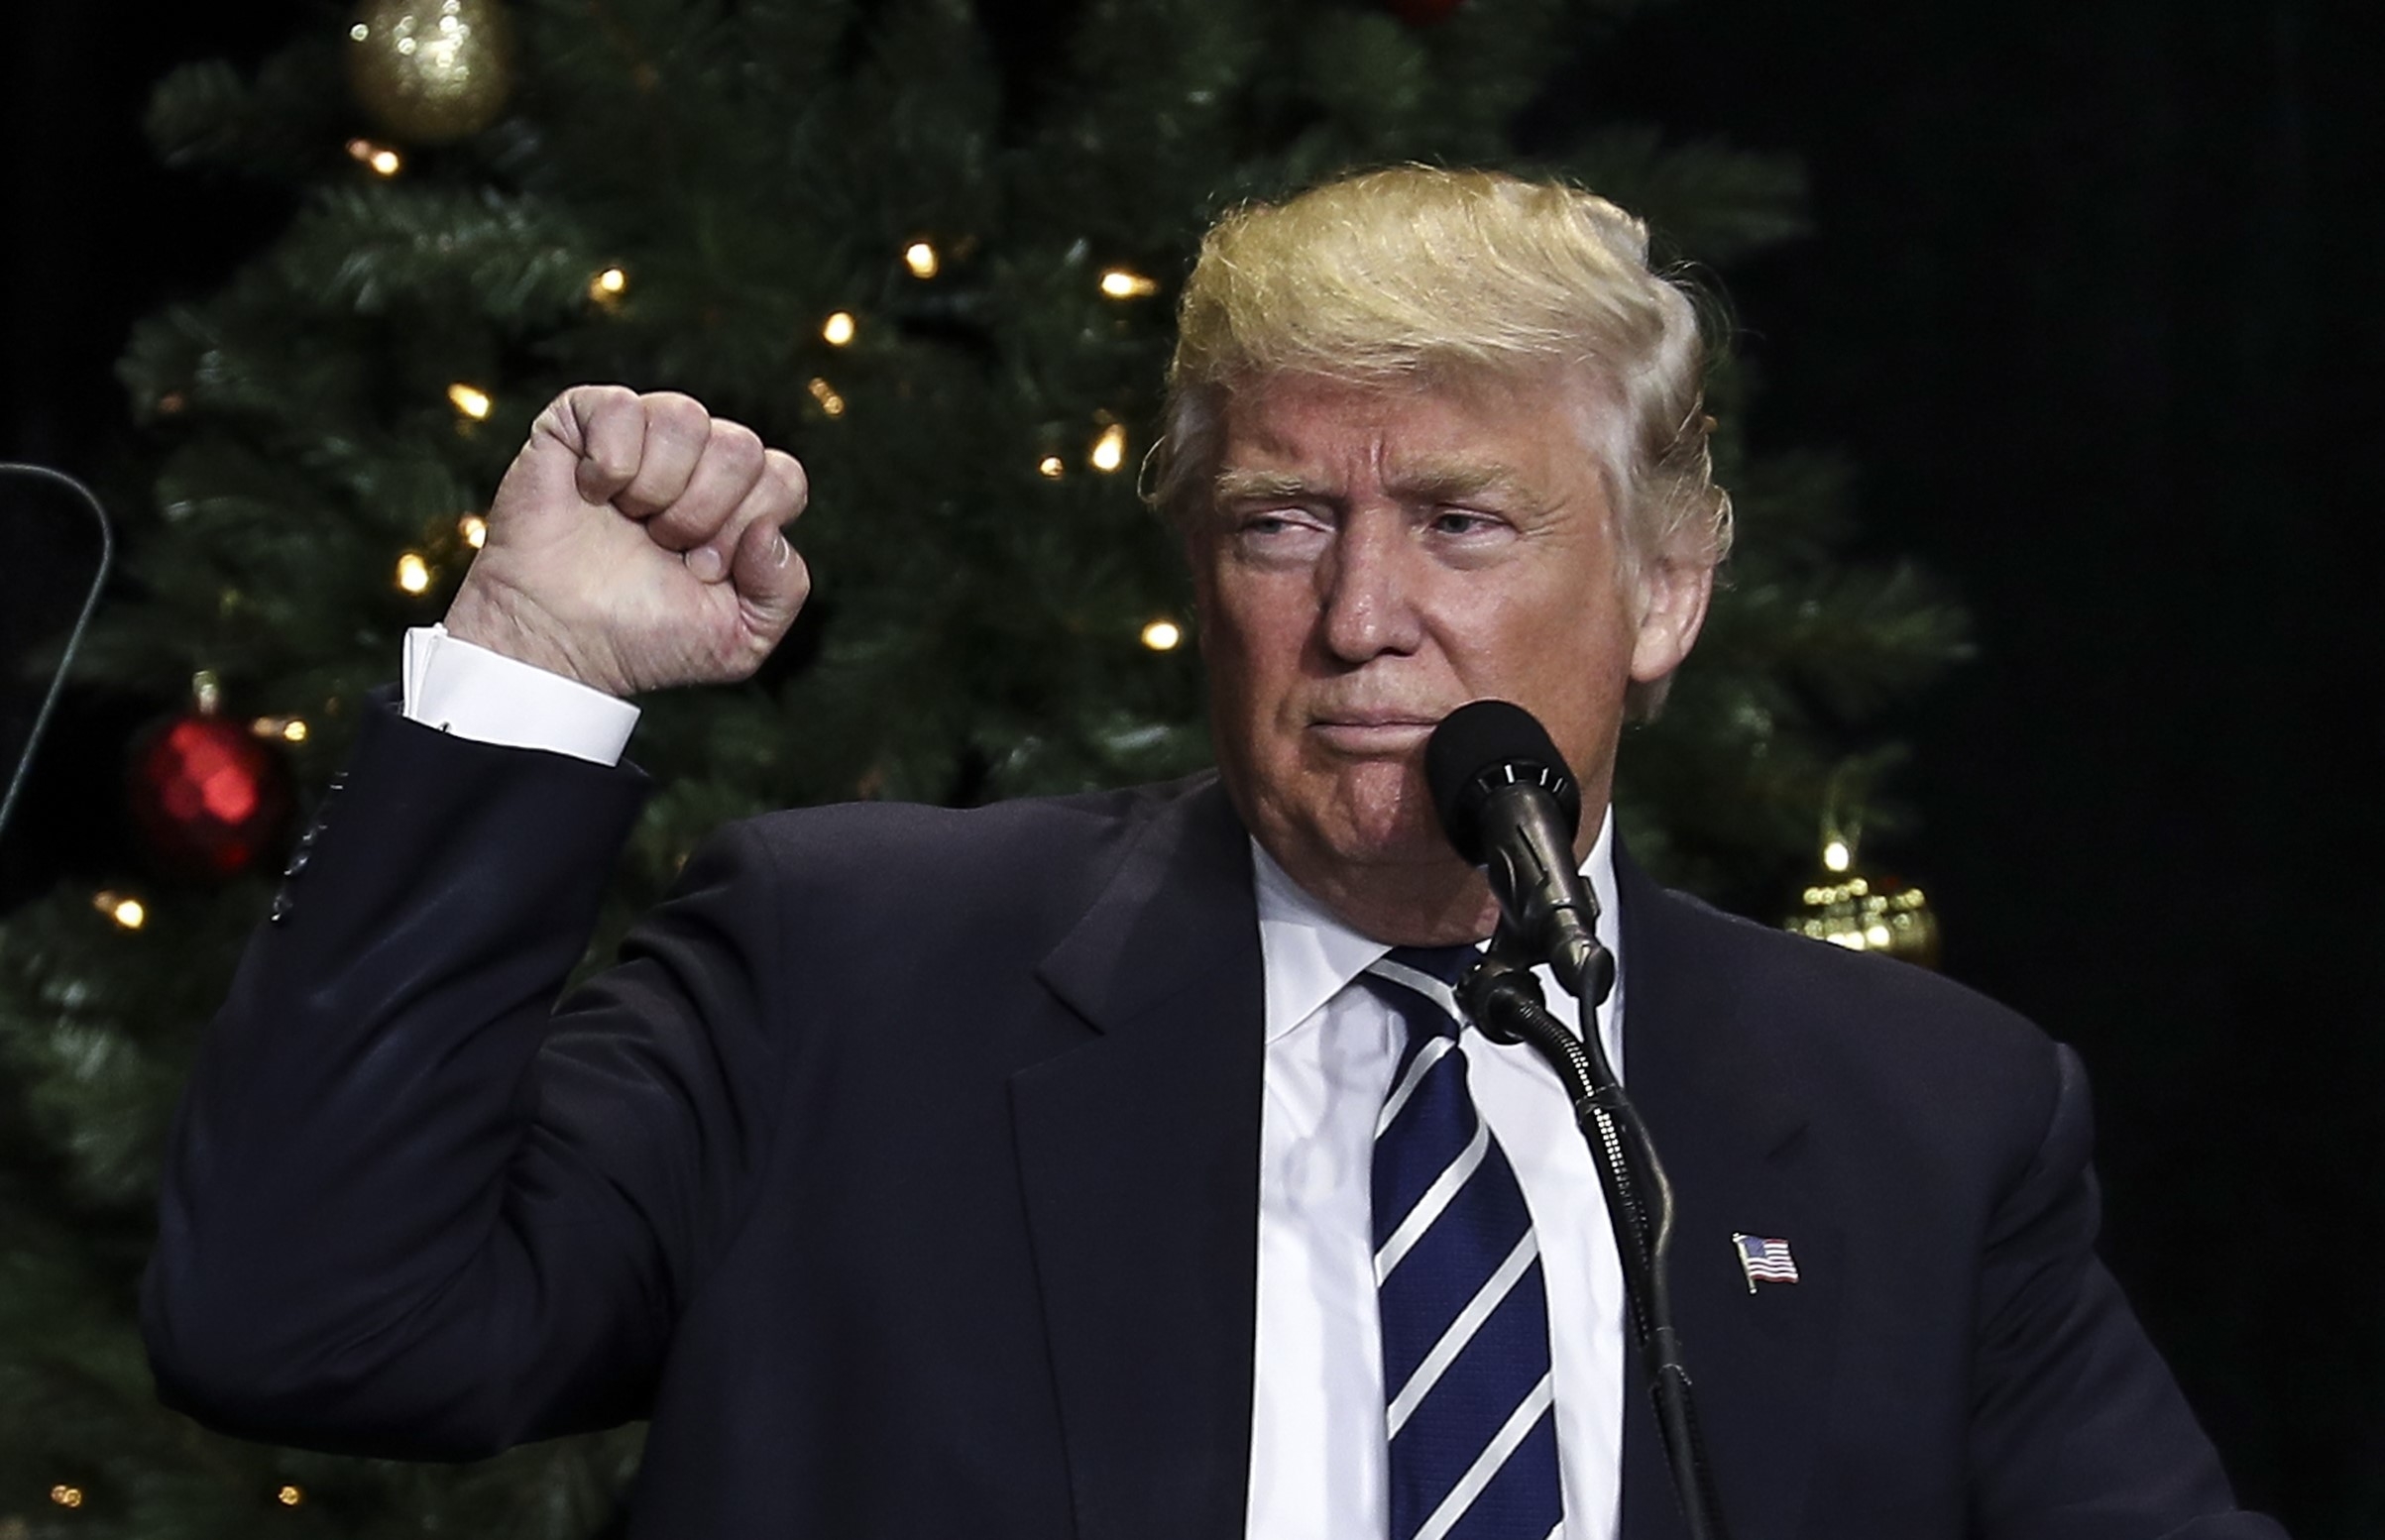 Donald Trump, wearing a suit, makes a gesture at a podium with a Christmas tree in the background